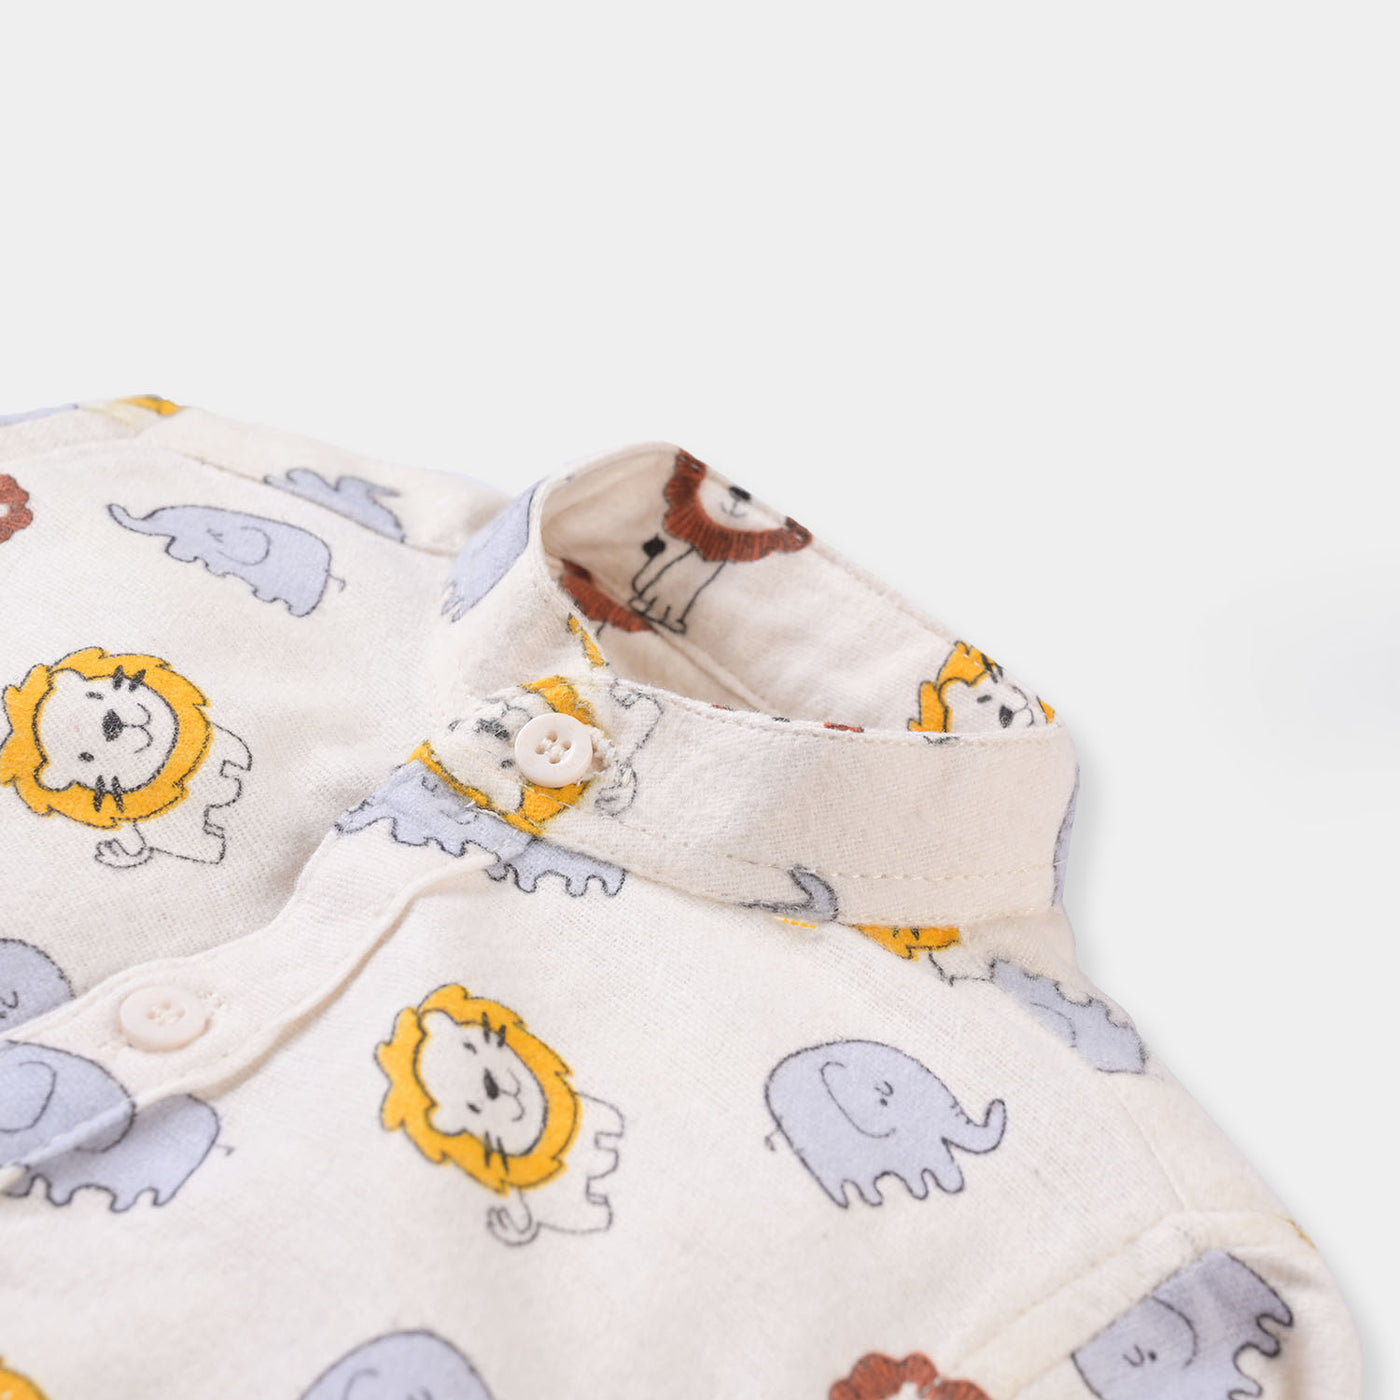 Boys Flannel Casual Shirt Animals -Off White